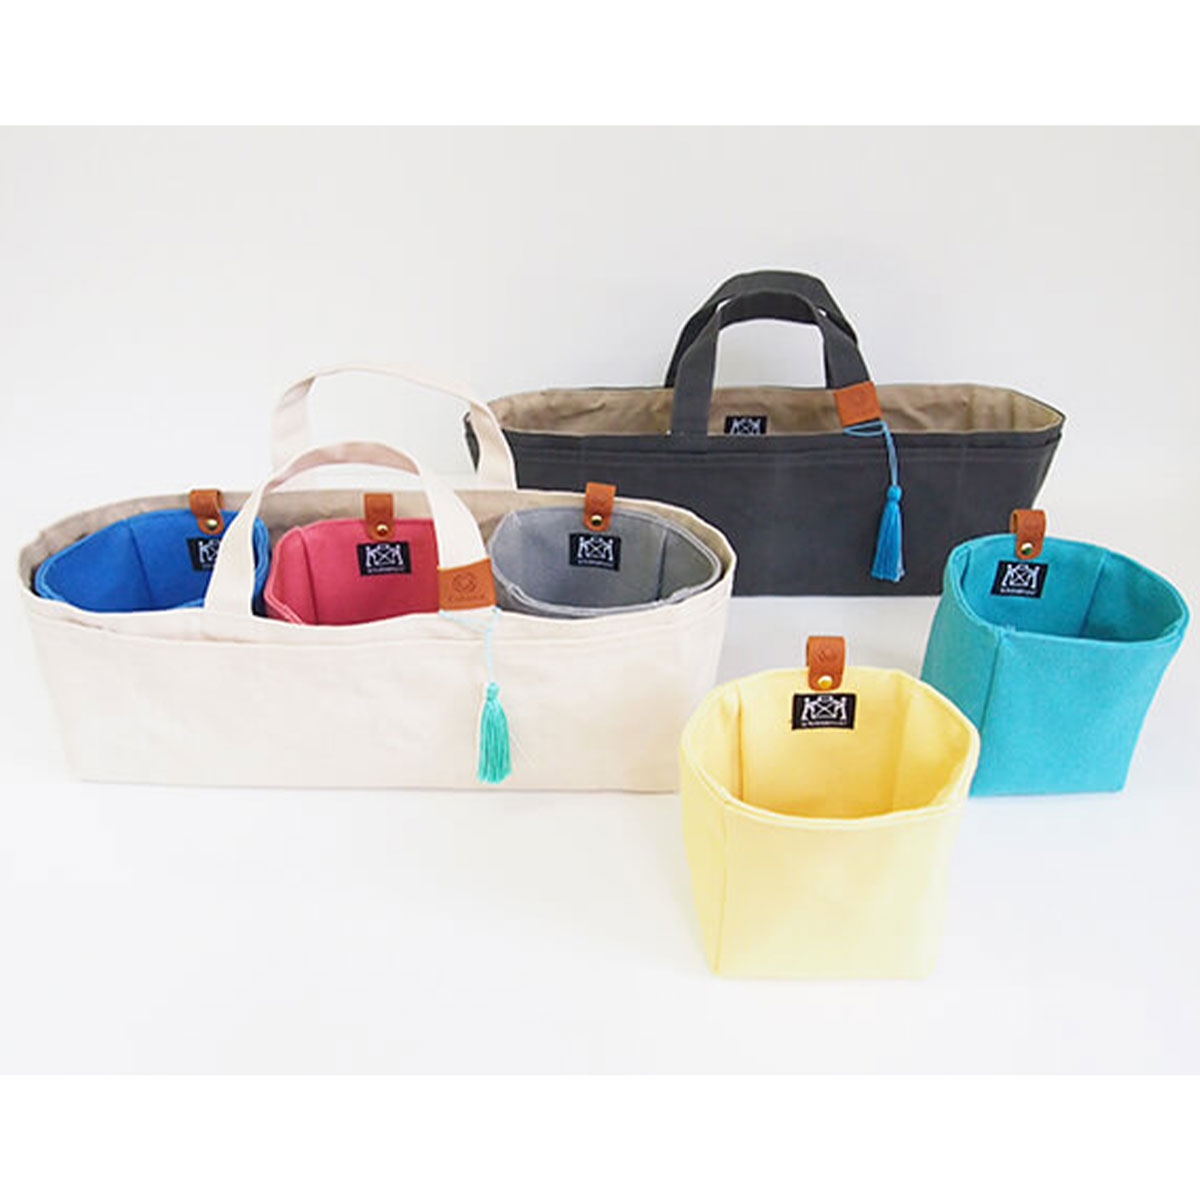 Cohana Bags & Pouches - Canvas Knickknack Bag - Blue at Jimmy Beans Wool